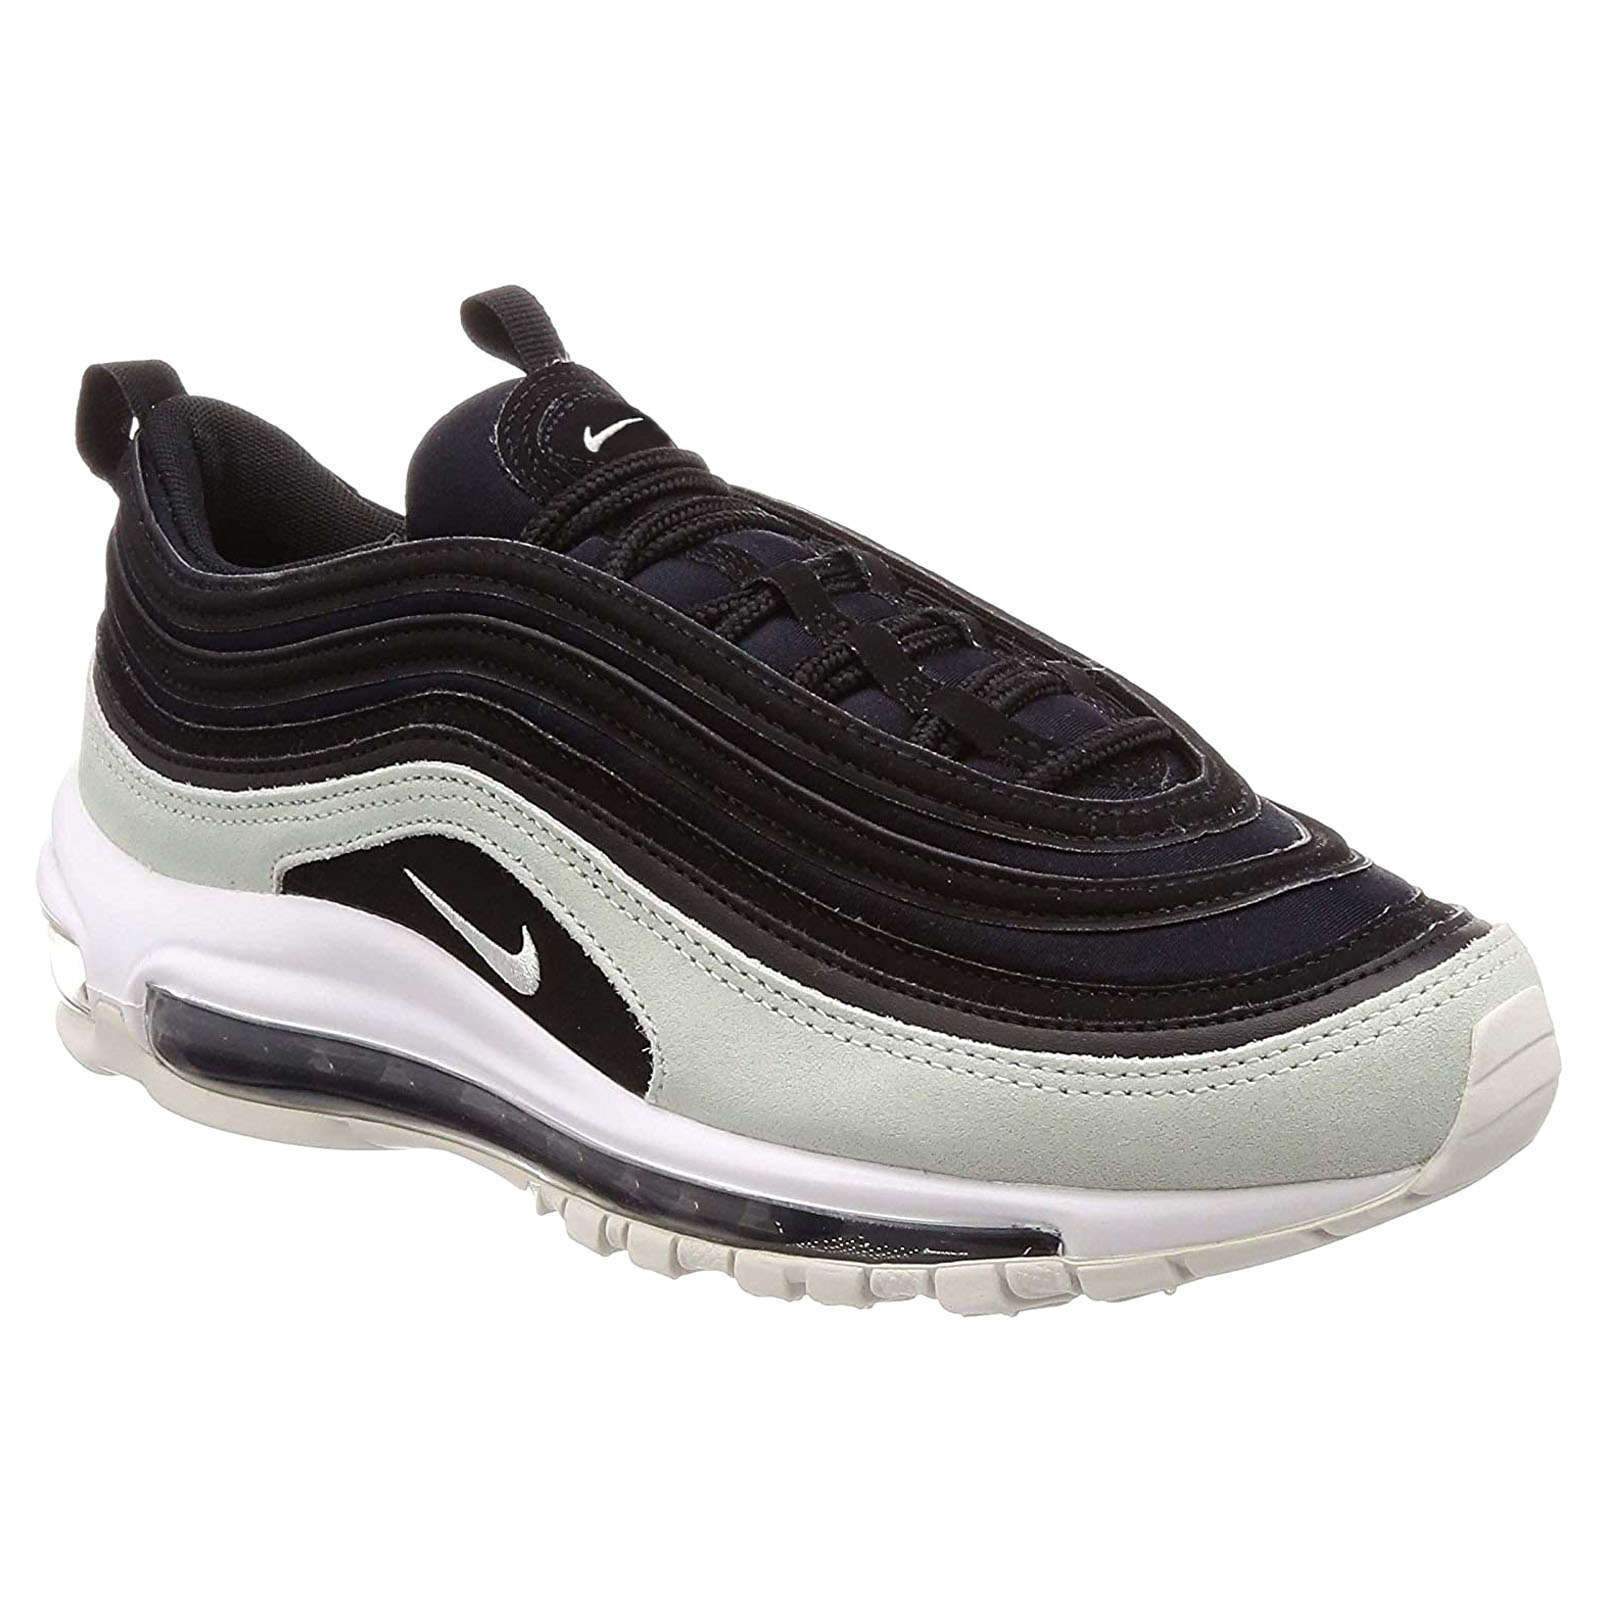 Nike Air Max 97 PRM Textile Leather Synthetic Women's Low-Top Sneakers#color_black spuce aura